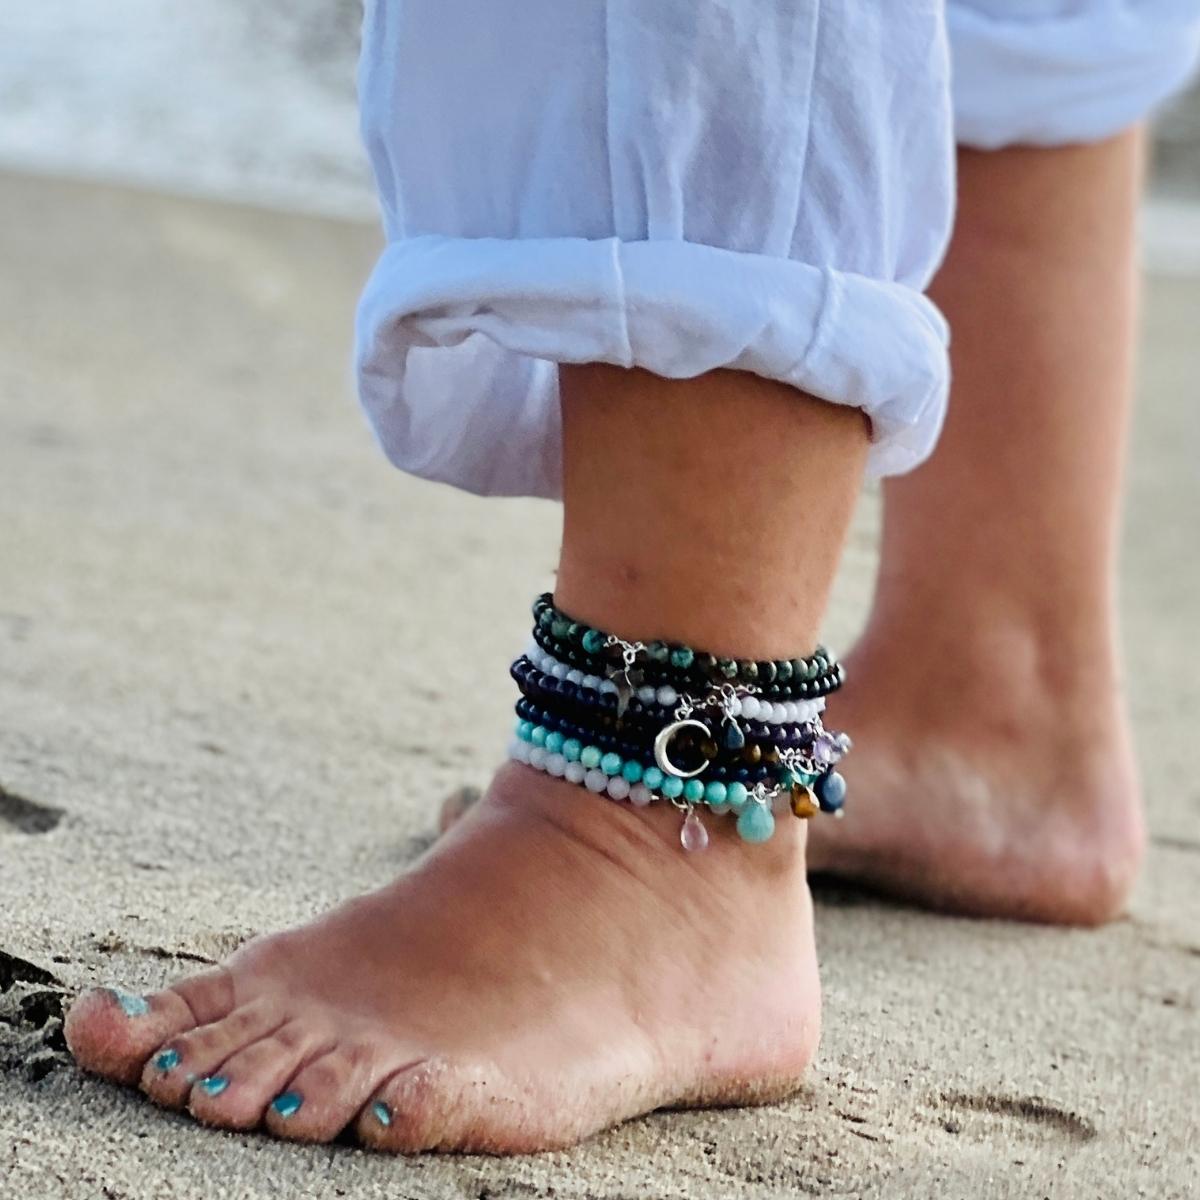 Ankle Bracelets for Women After 40 - Stylish or Silly?